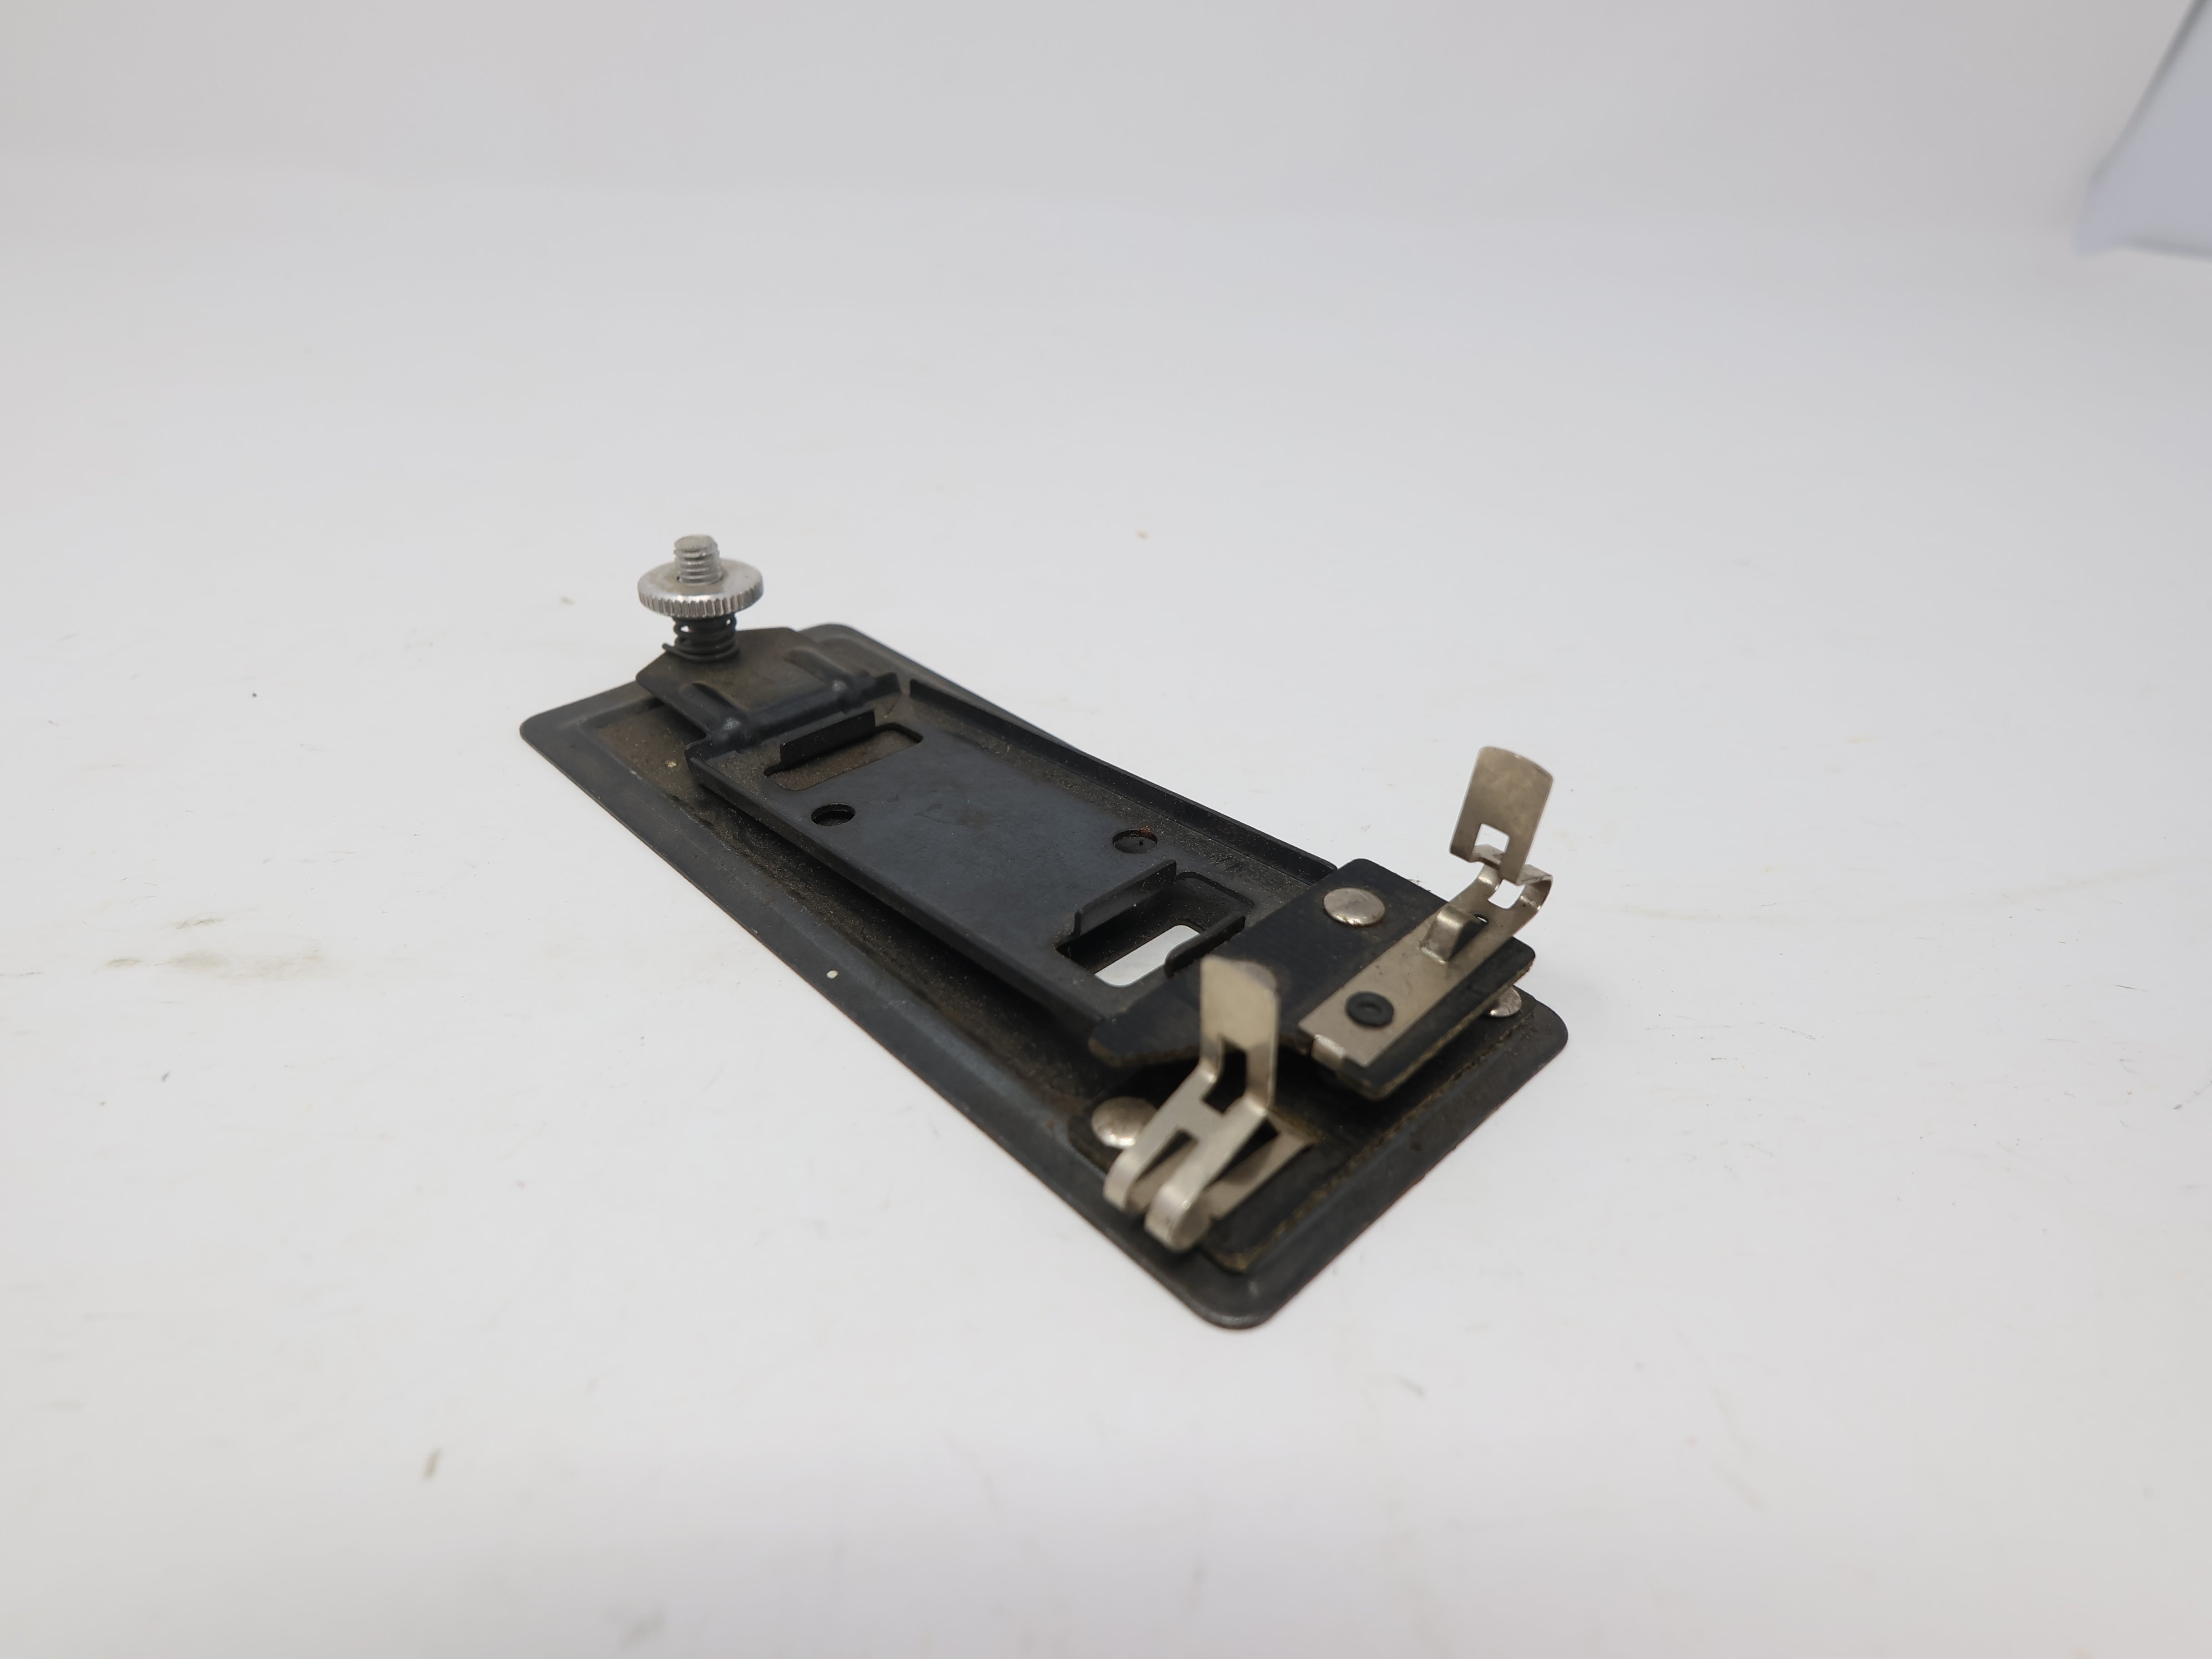 USED Lionel 145C O, Vintage Automatic Accessories Contactor (1 piece)